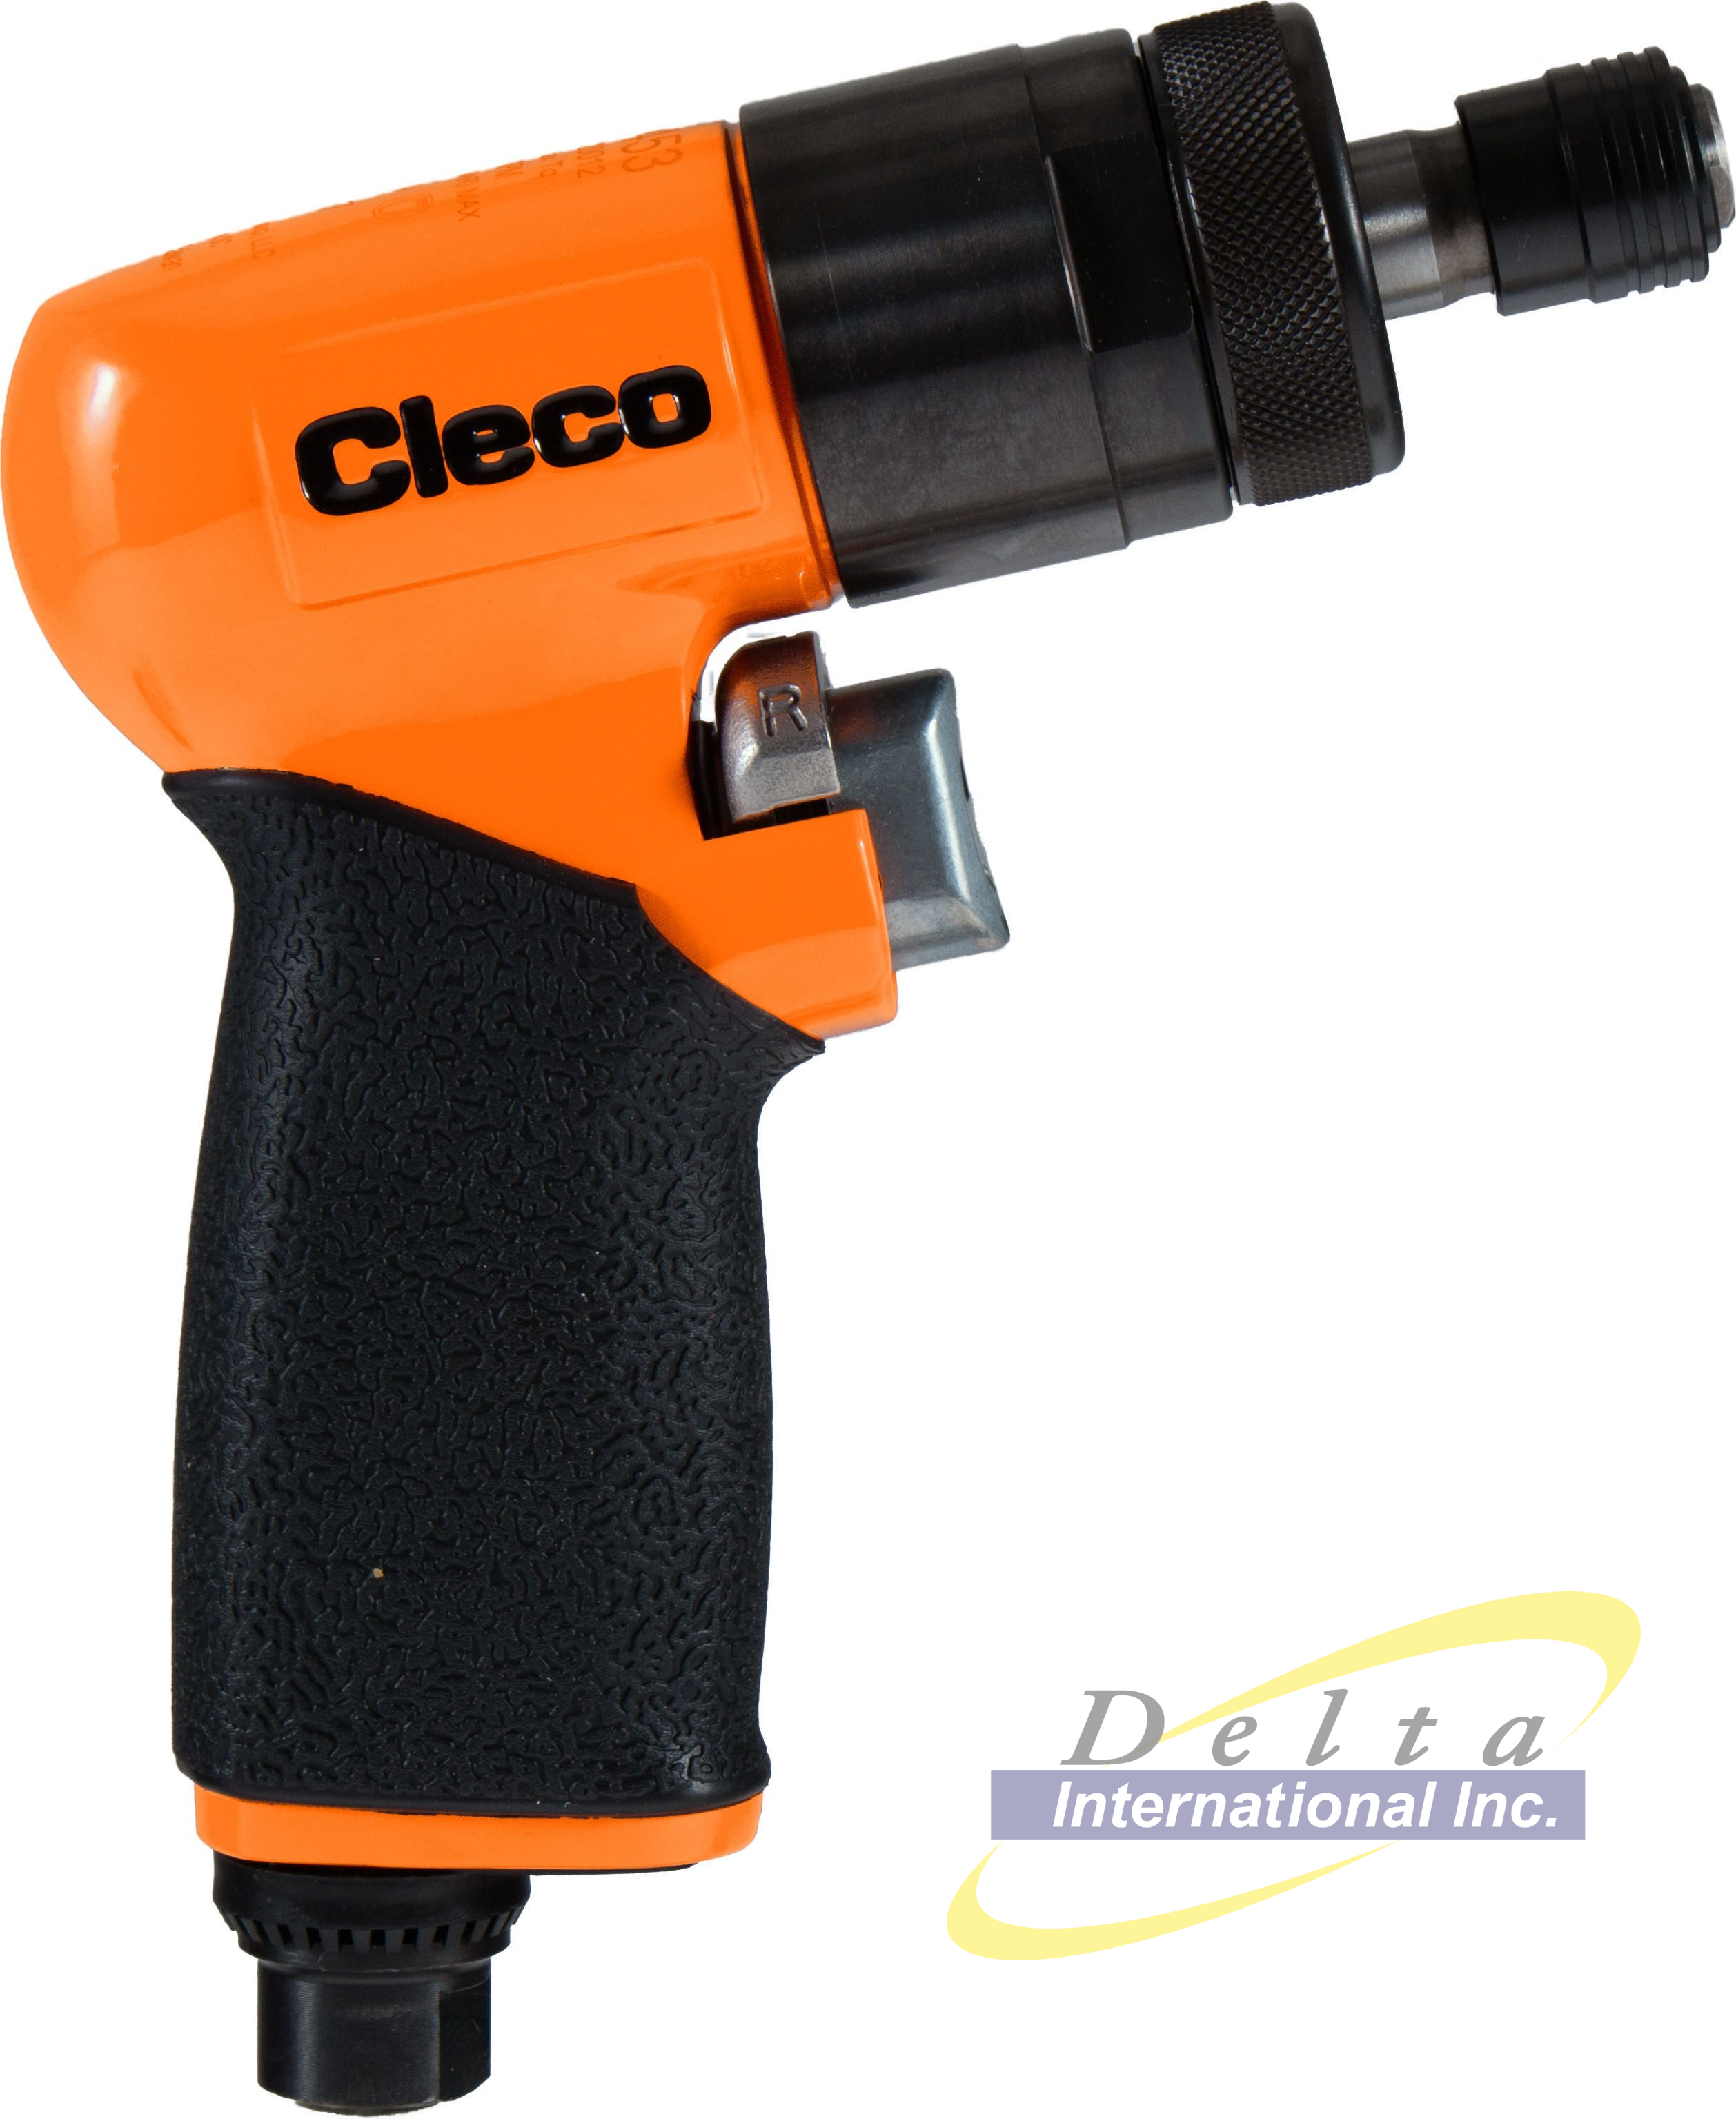 Cleco MP2452 - MP Series Direct Drive Screwdrivers